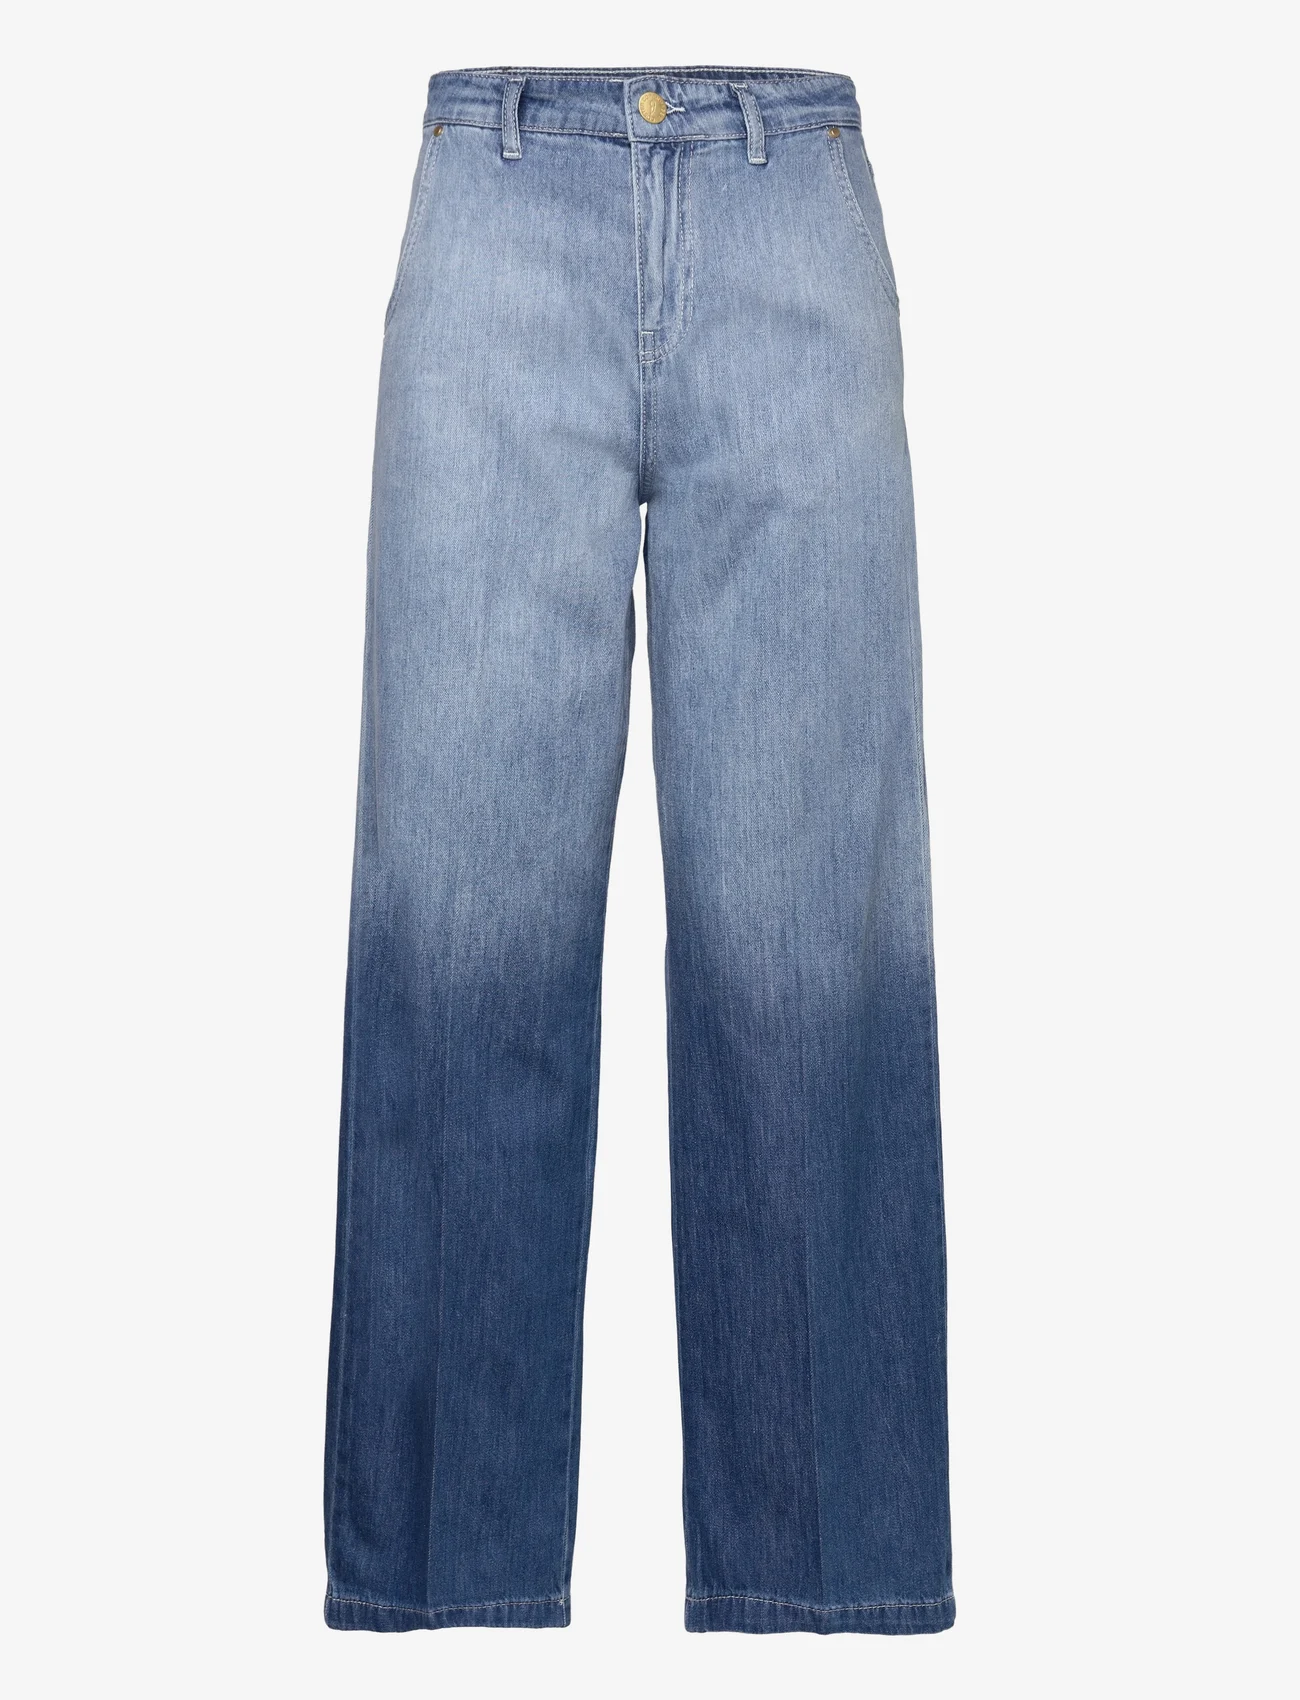 Coster Copenhagen - Jeans with wide legs and press fold - Petra fit - wide leg jeans - denim fade - 0